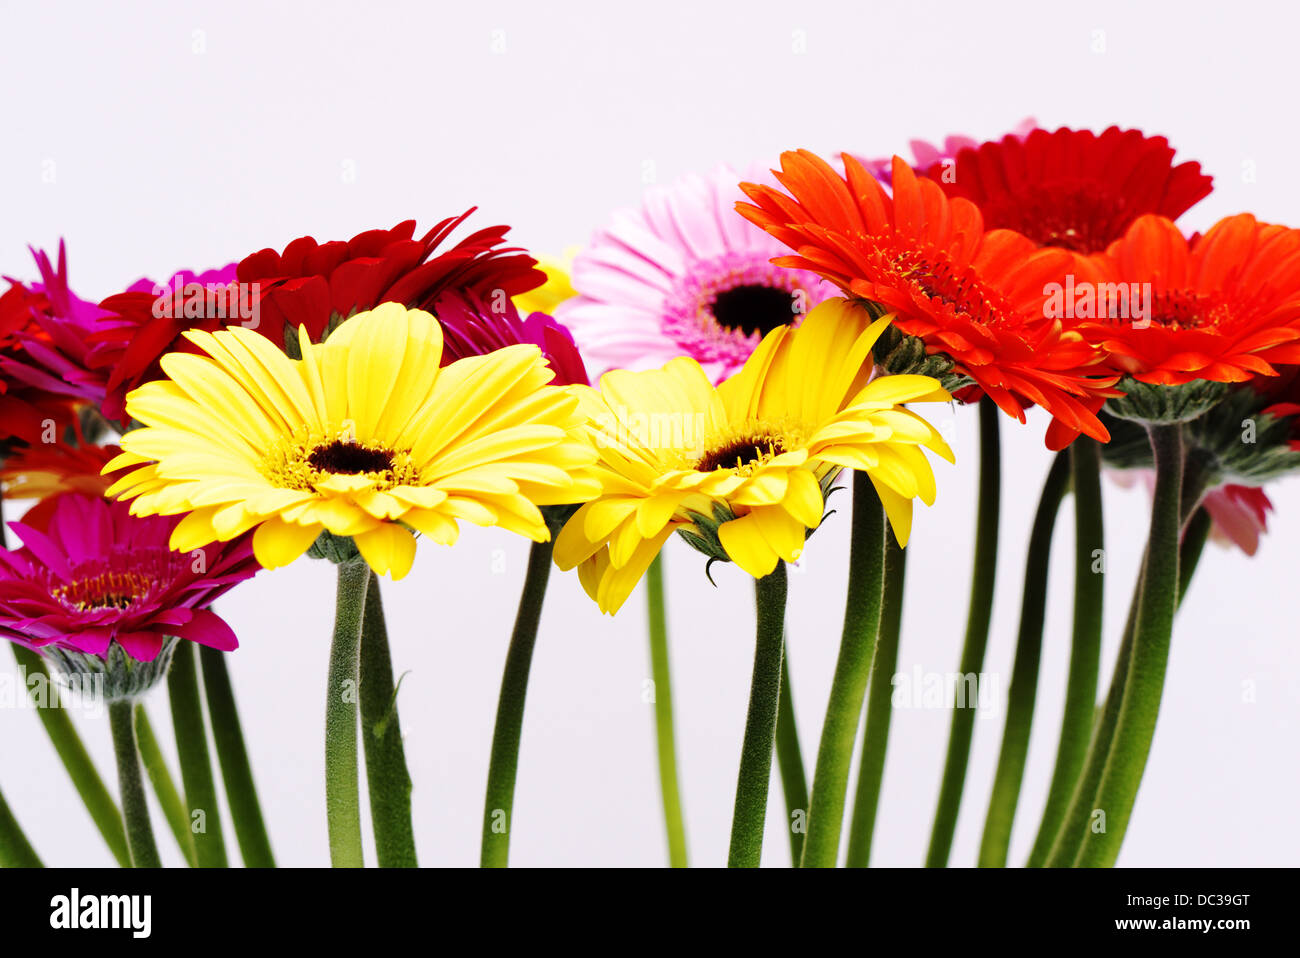 A  colorful display of  cut daisy's Stock Photo